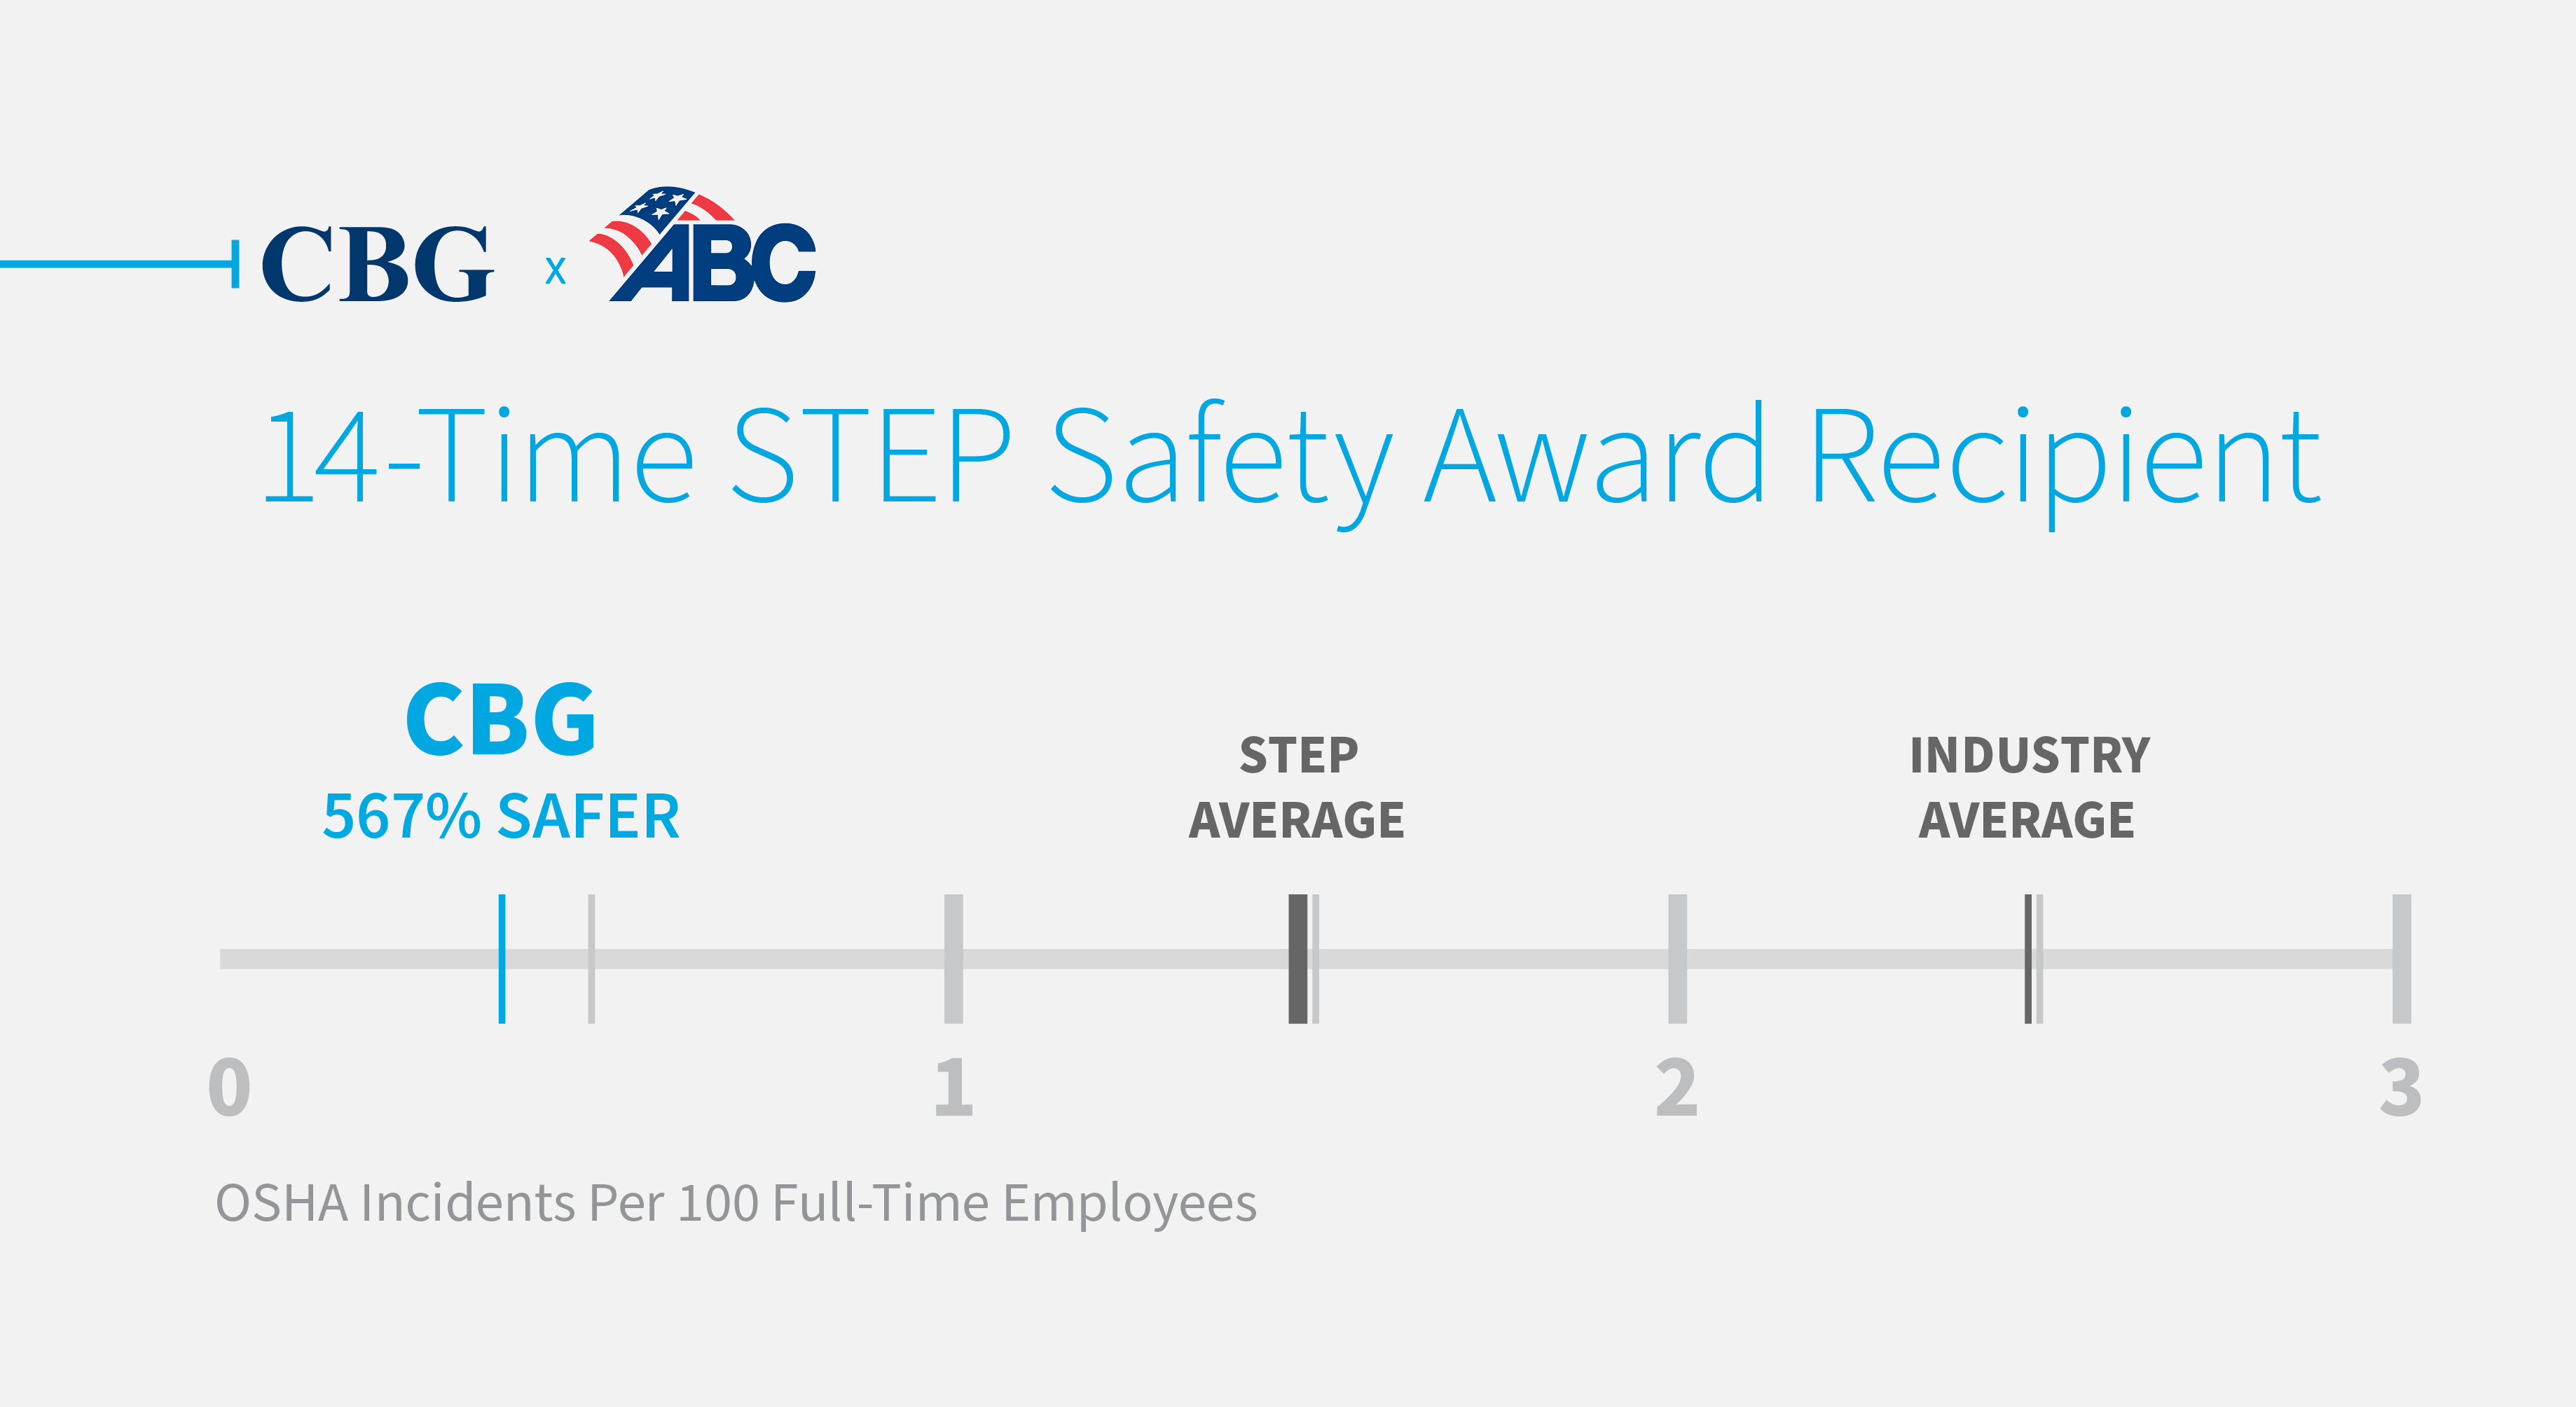 CBG consistently earns STEP construction safety awards at the diamond level.